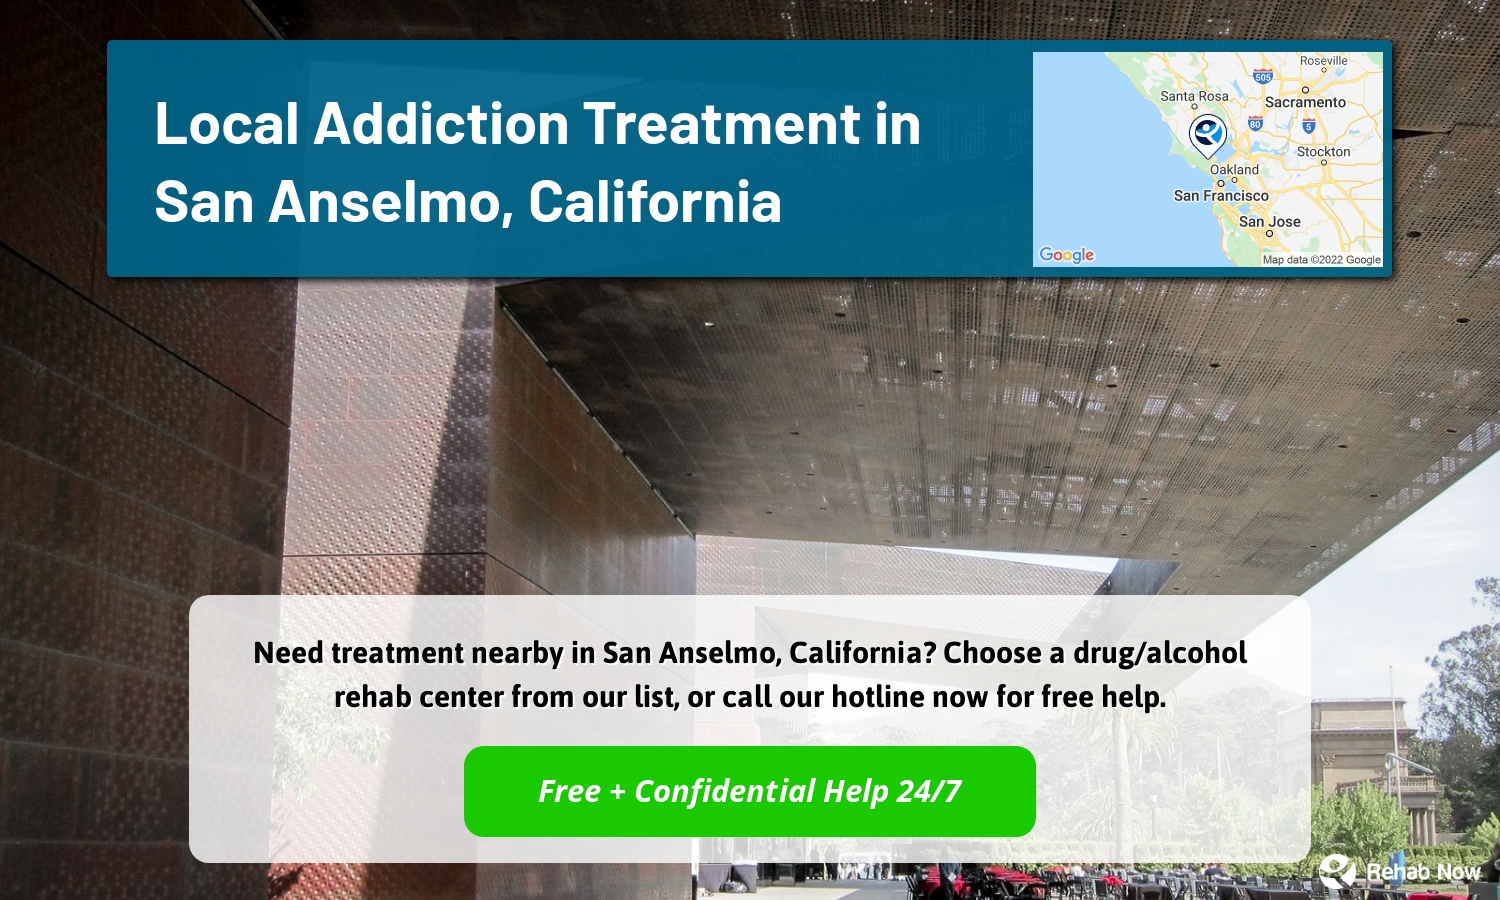 Need treatment nearby in San Anselmo, California? Choose a drug/alcohol rehab center from our list, or call our hotline now for free help.